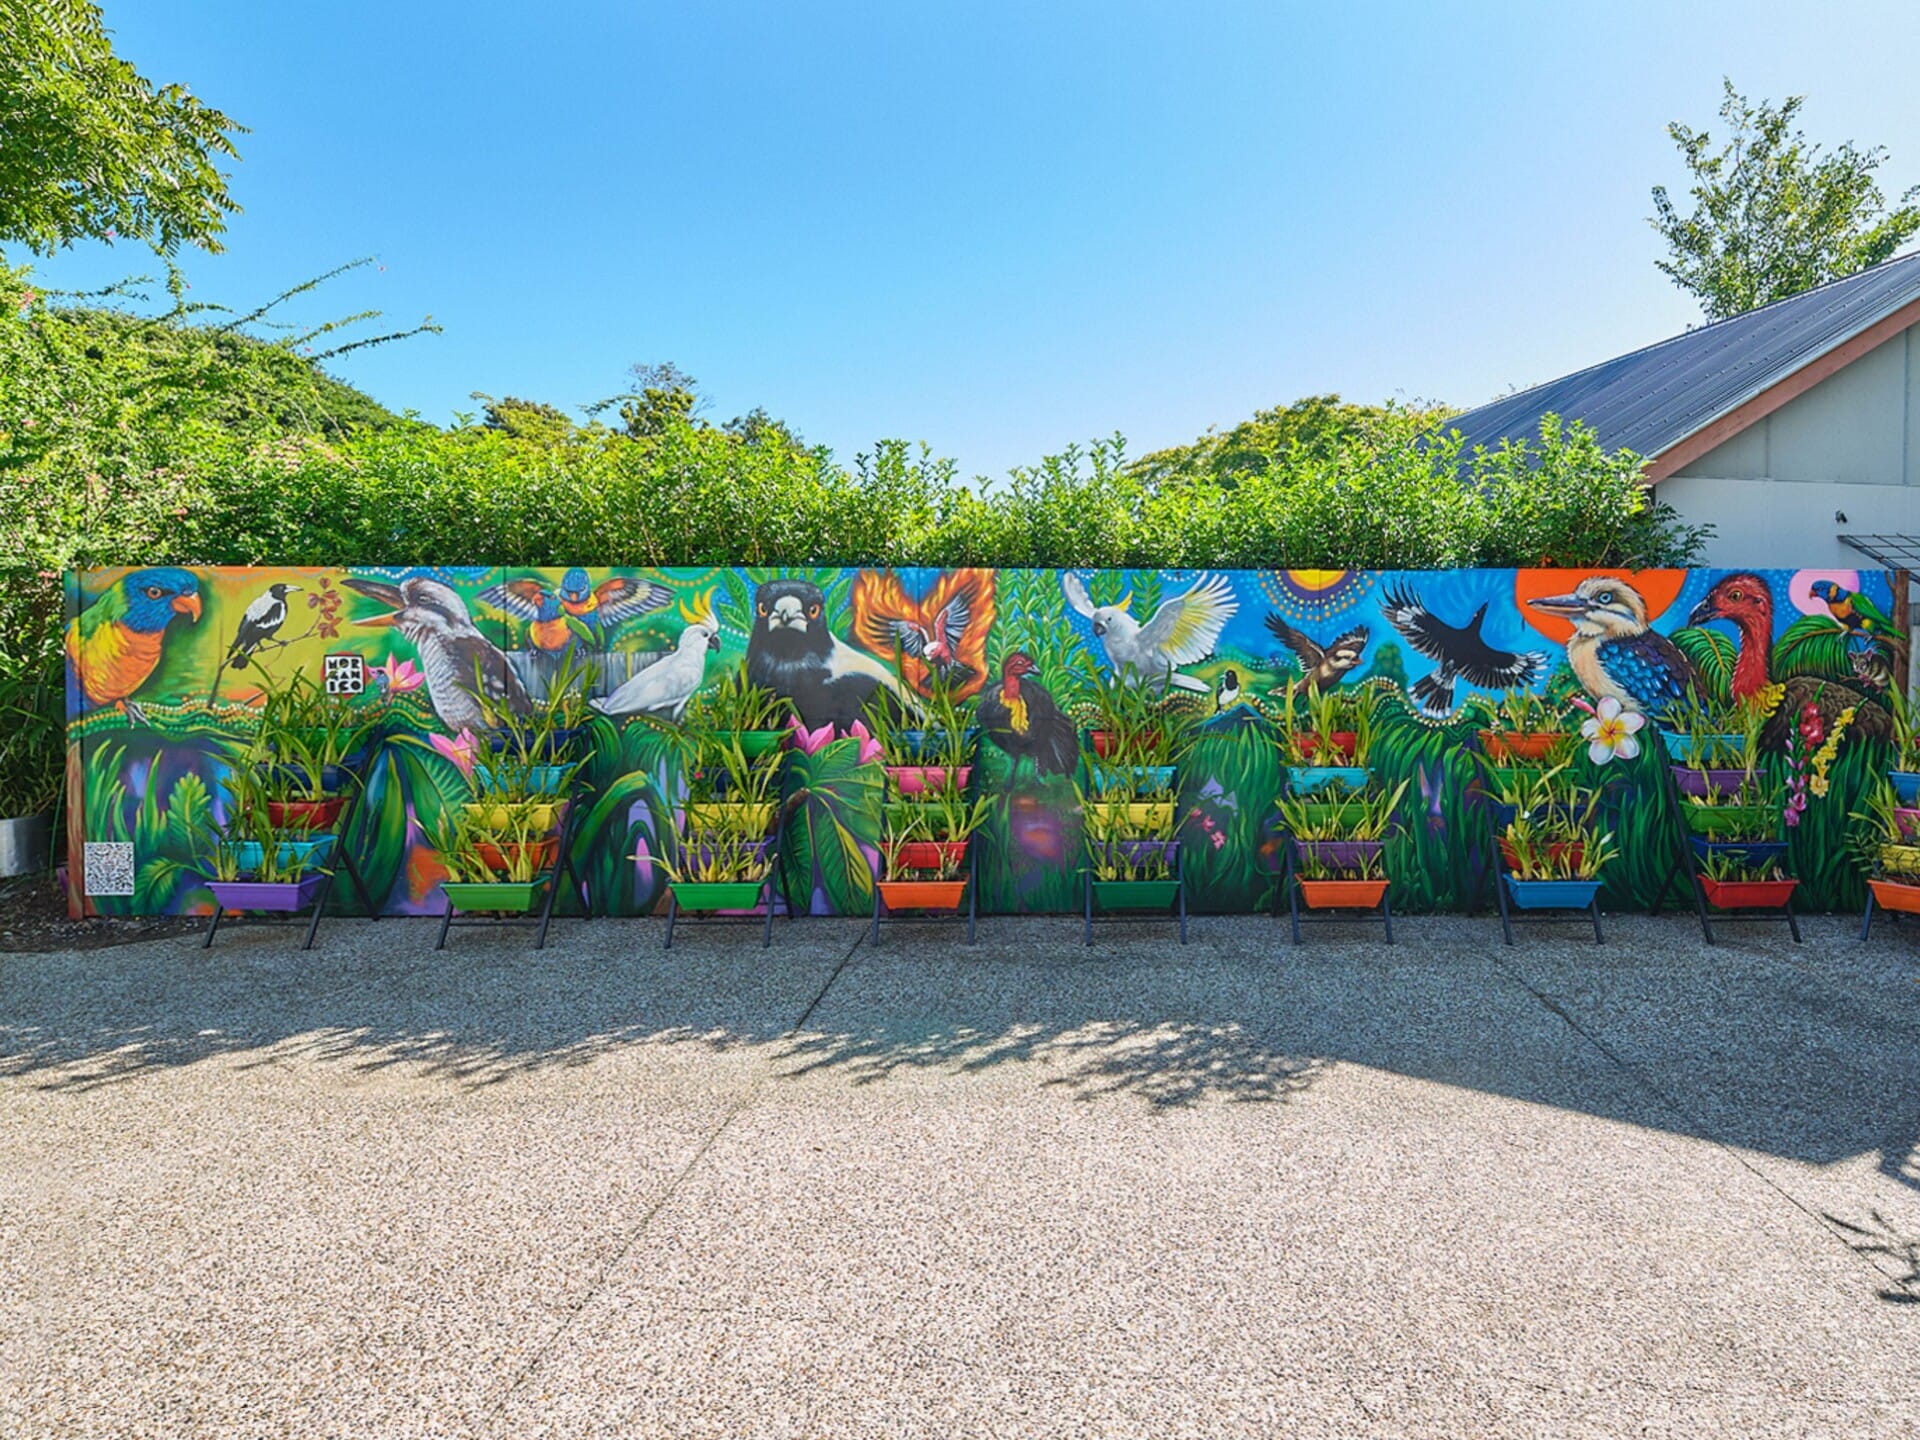 A colourful mural wall completely transforms the outdoor space